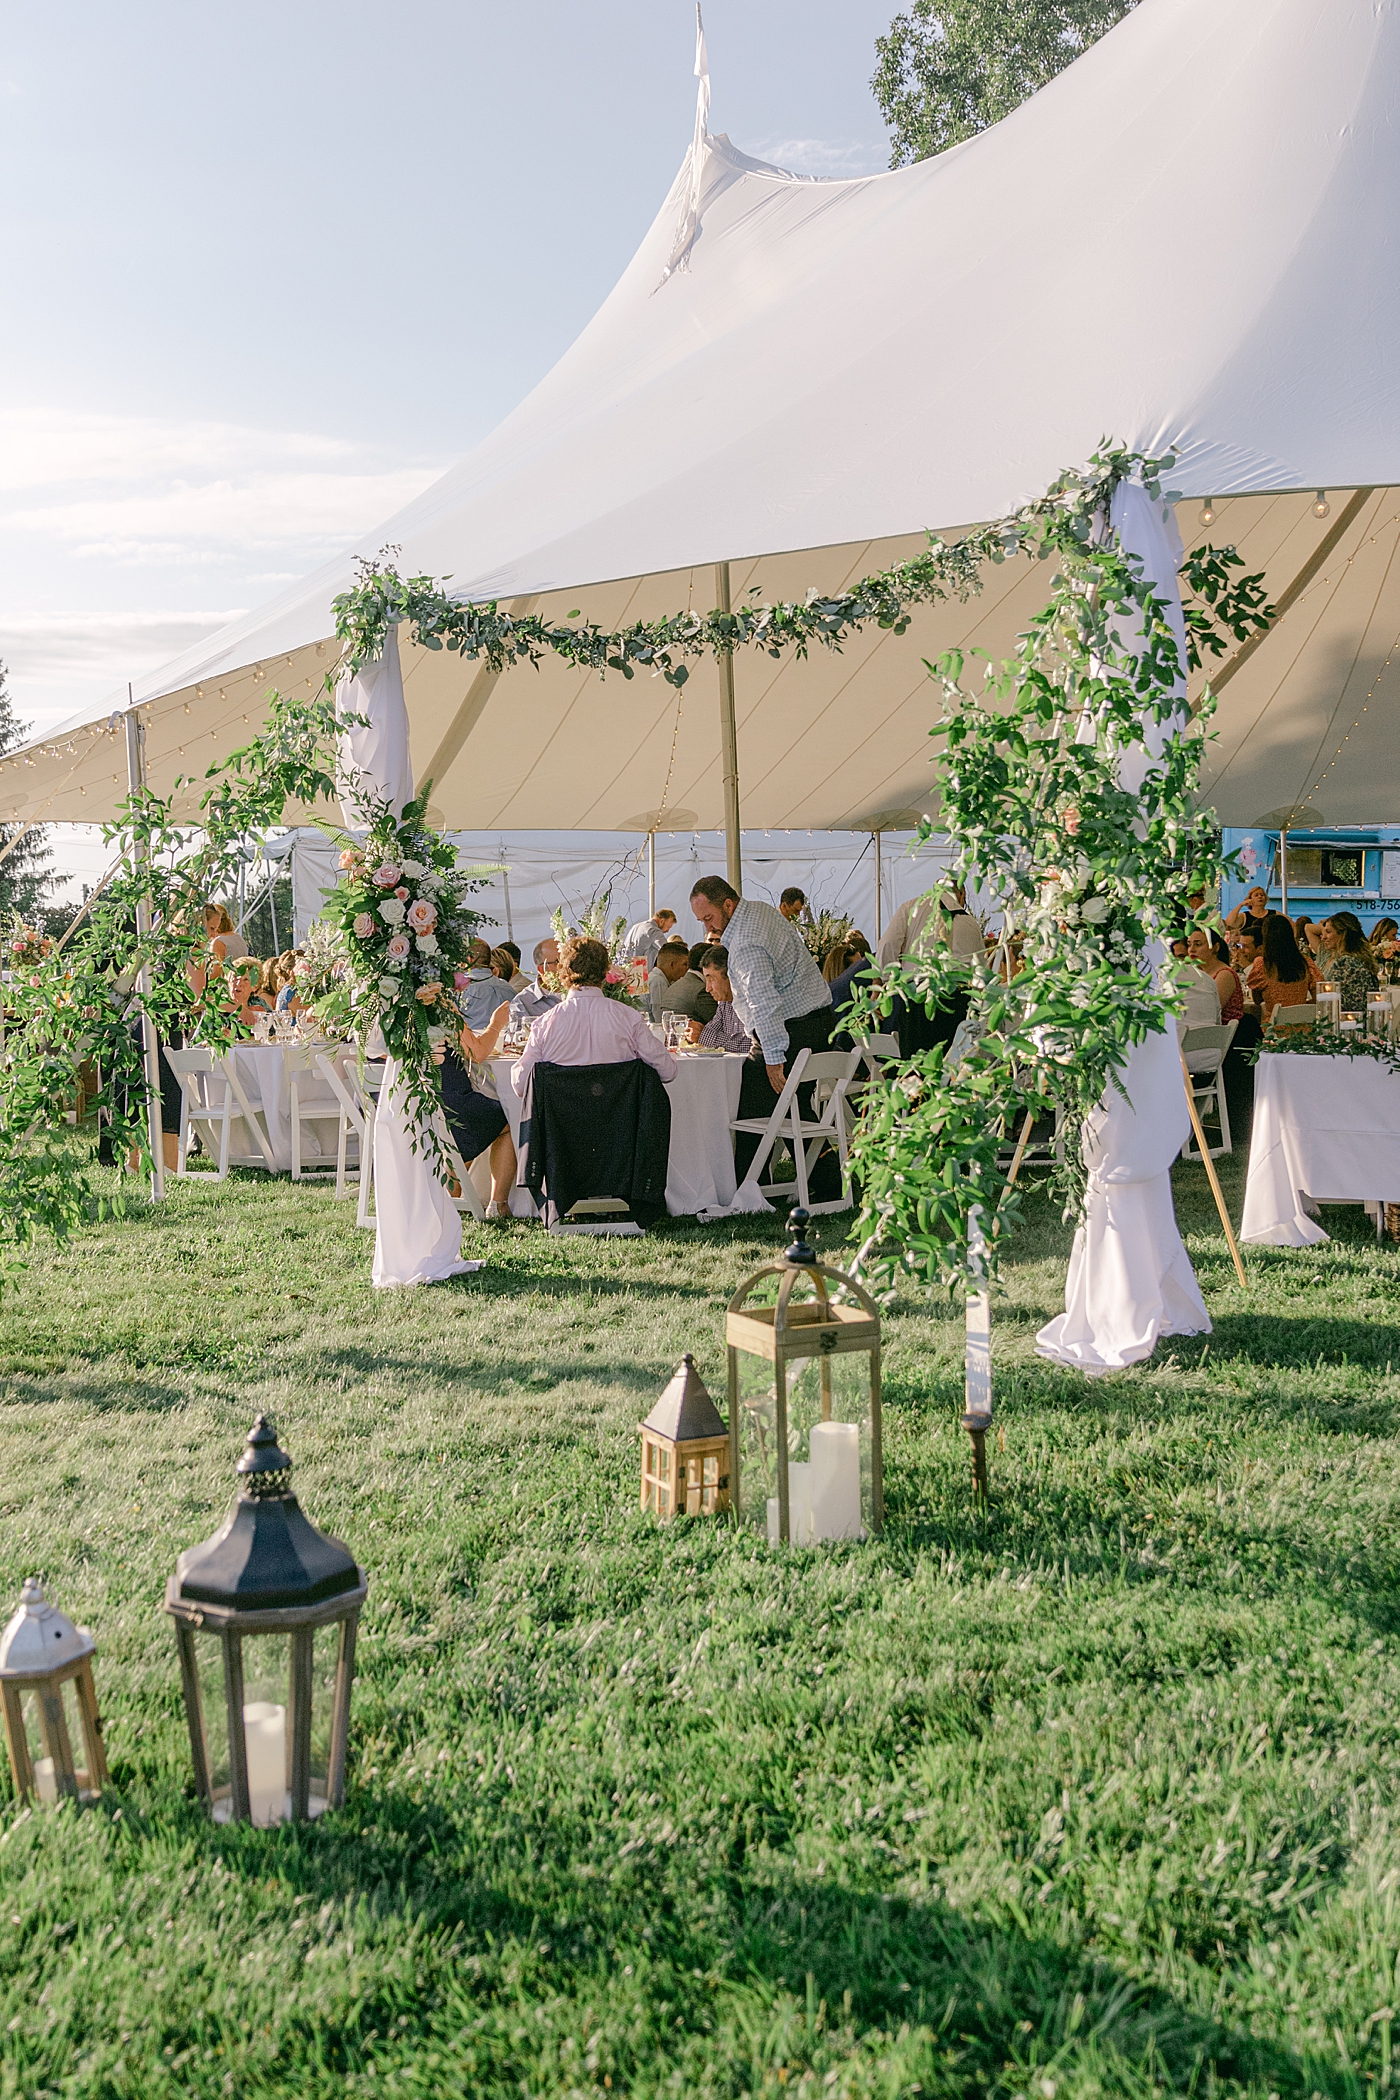 Sperry Sail Cloth tent | Image by Hope Helmuth Photography